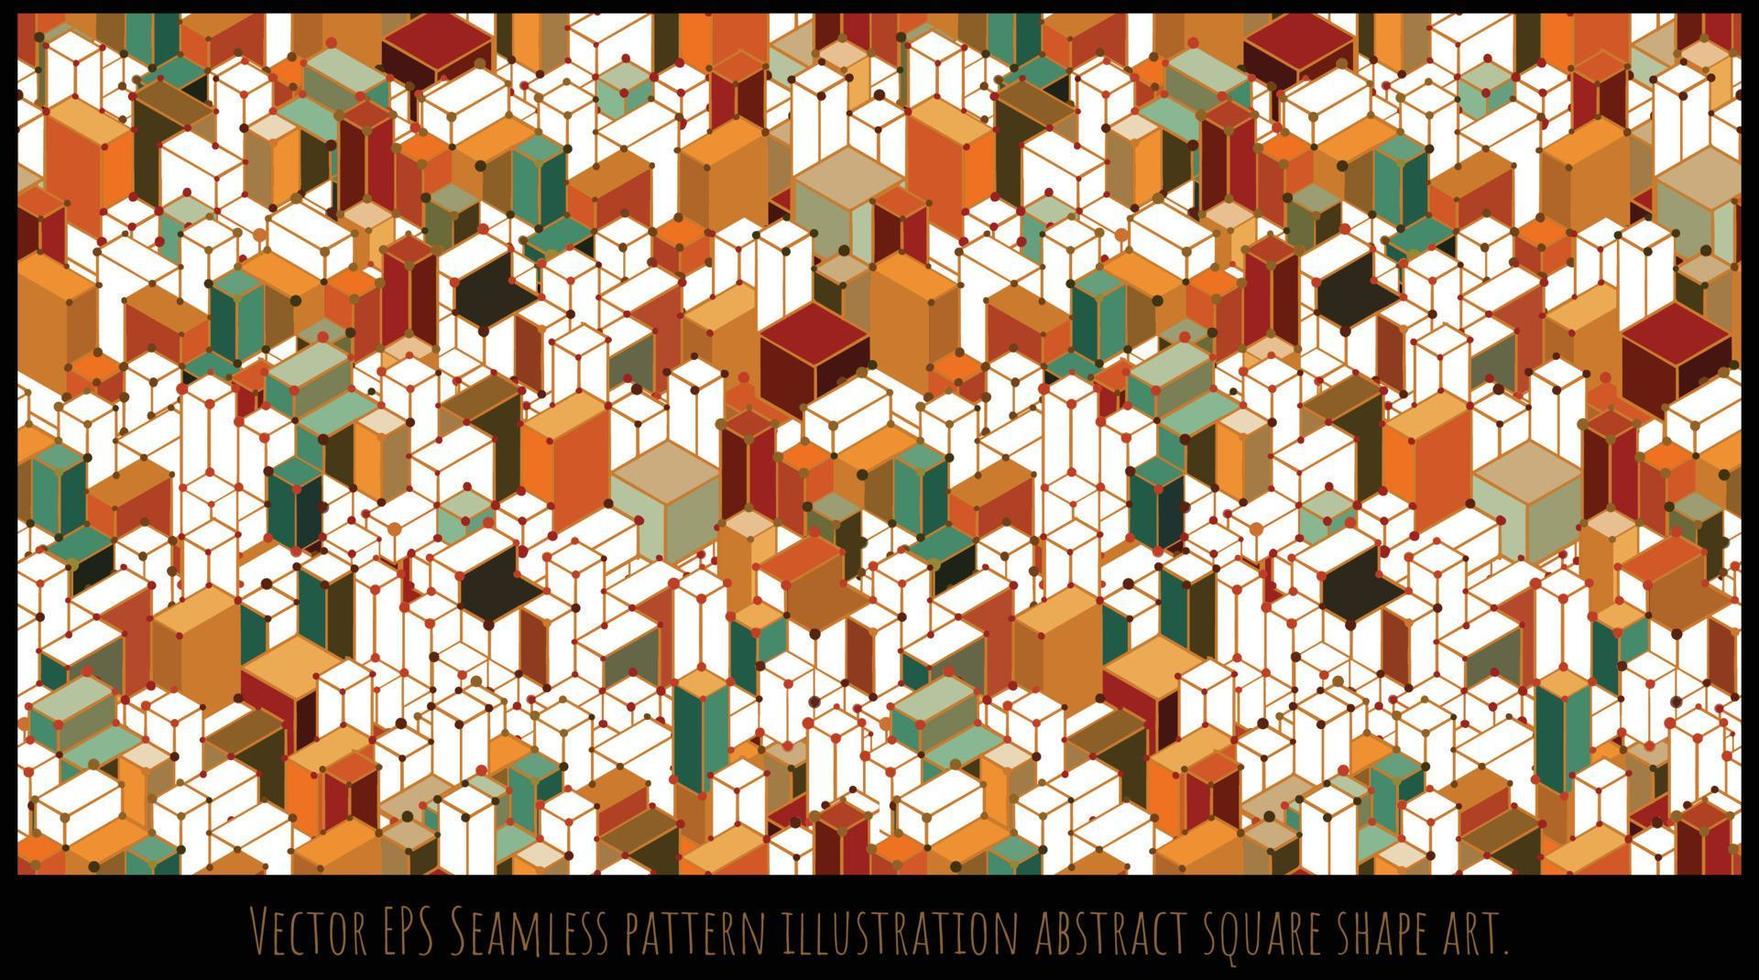 Vector EPS Seamless pattern illustration abstract square shape art